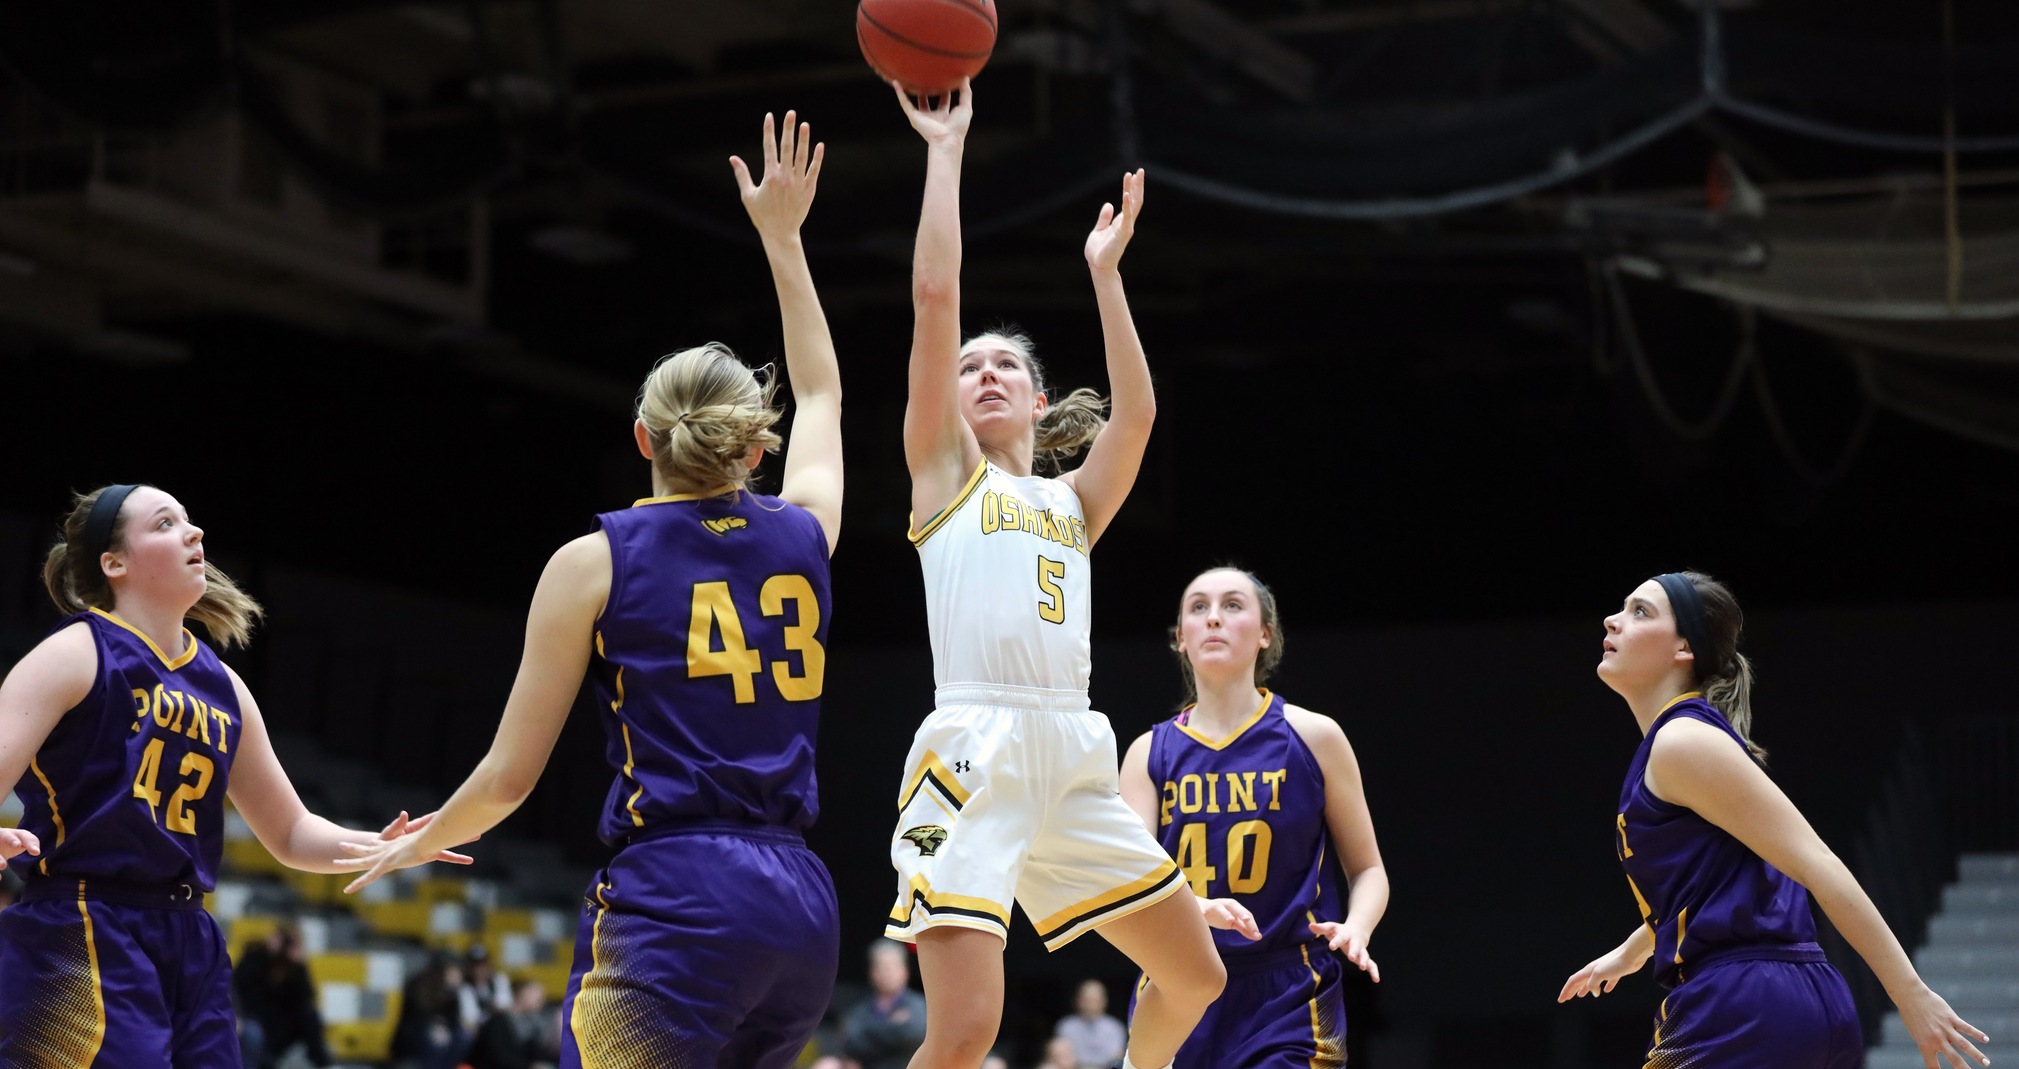 Chloe Pustina tallied 11 points against UW-Stevens Point for her third double-digit scoring game of the season.